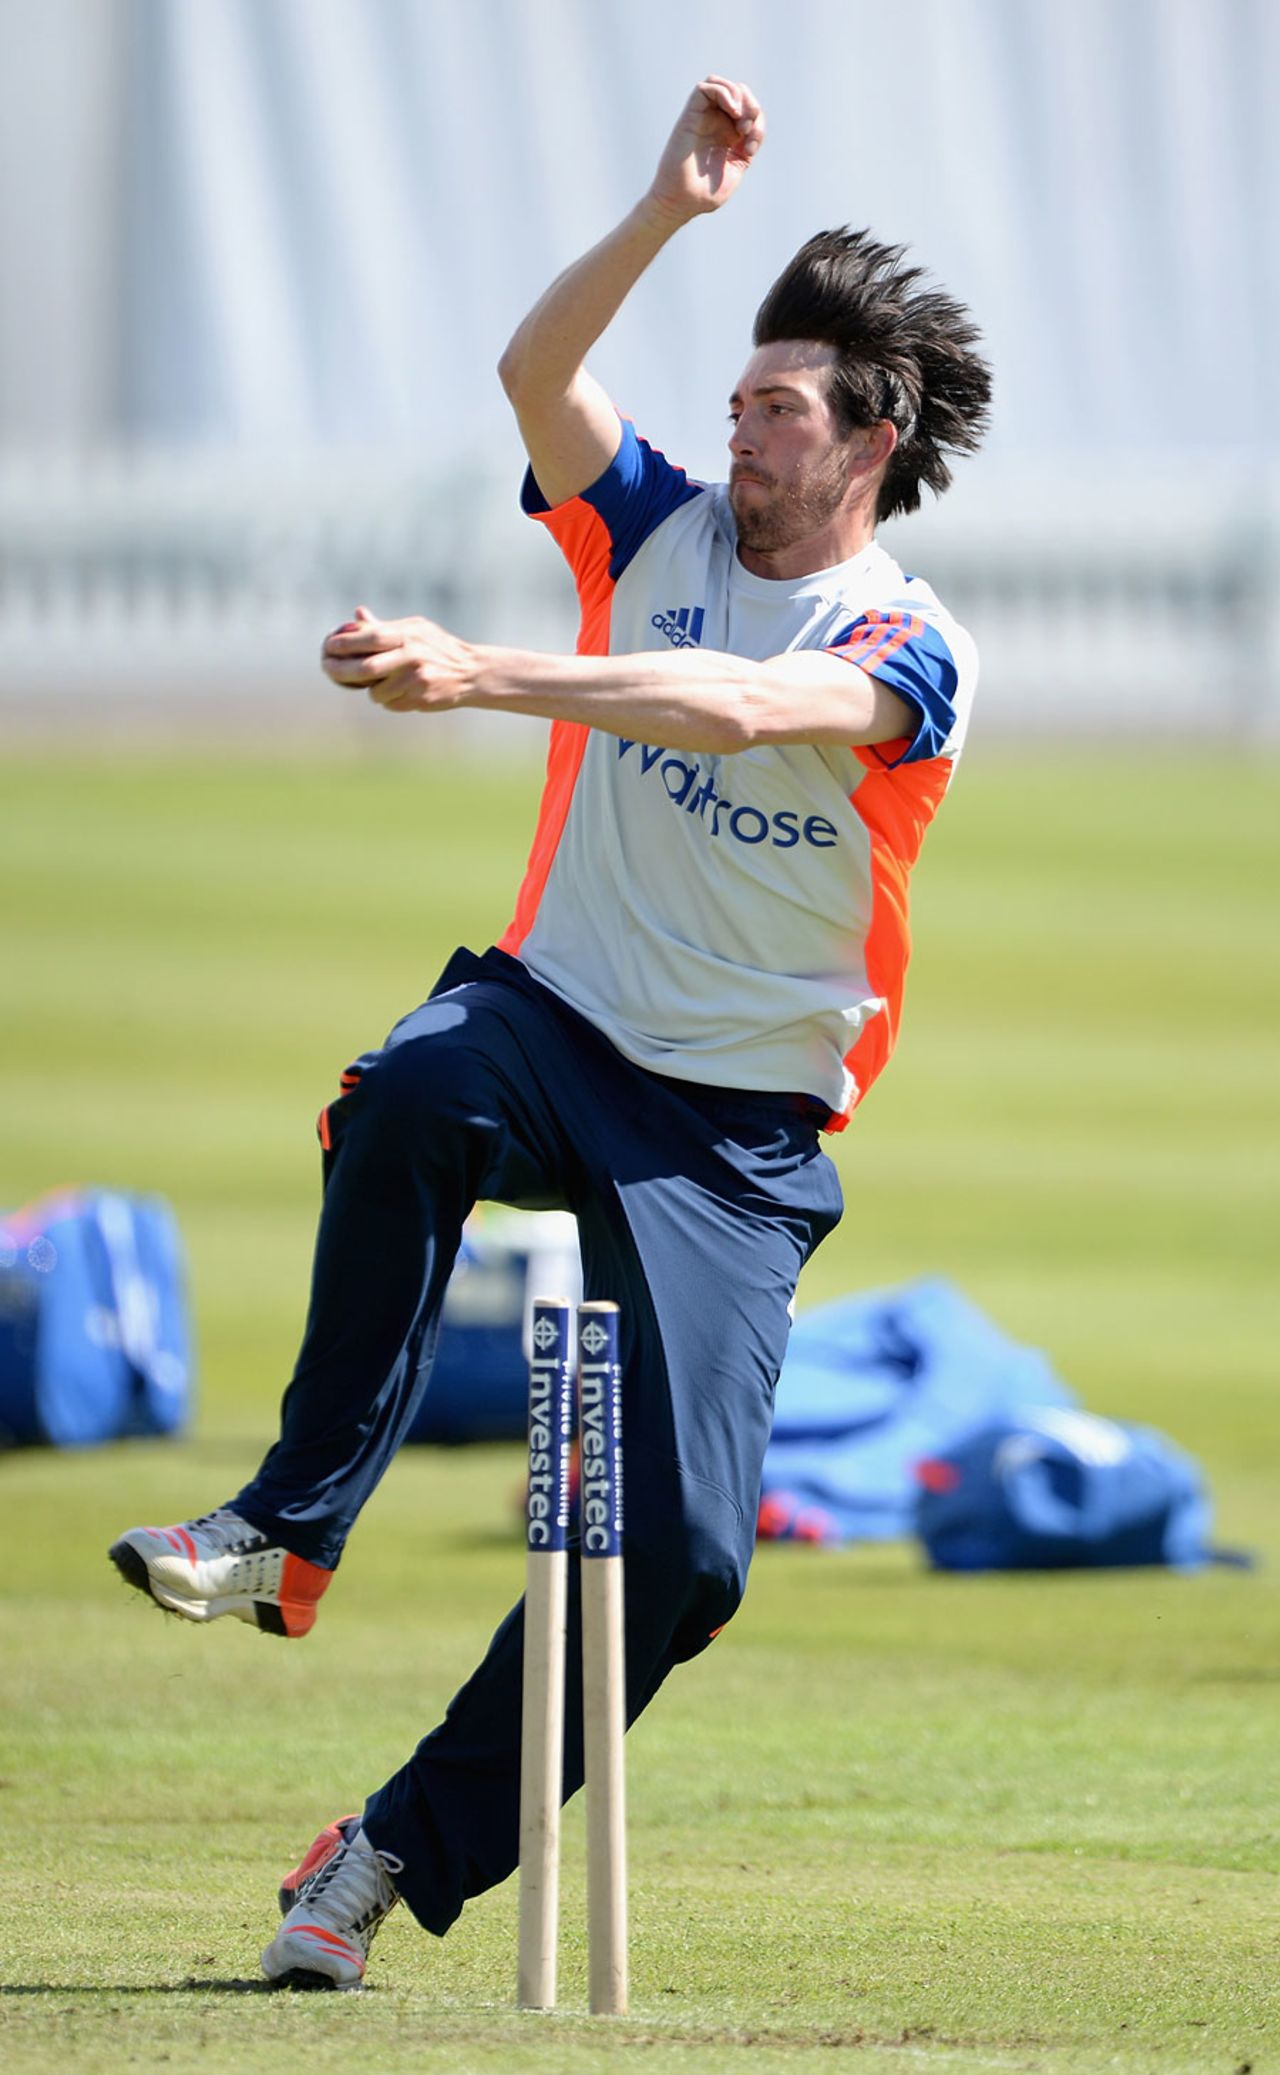 Mark Footitt trained with England, Lord's, May 19, 2015